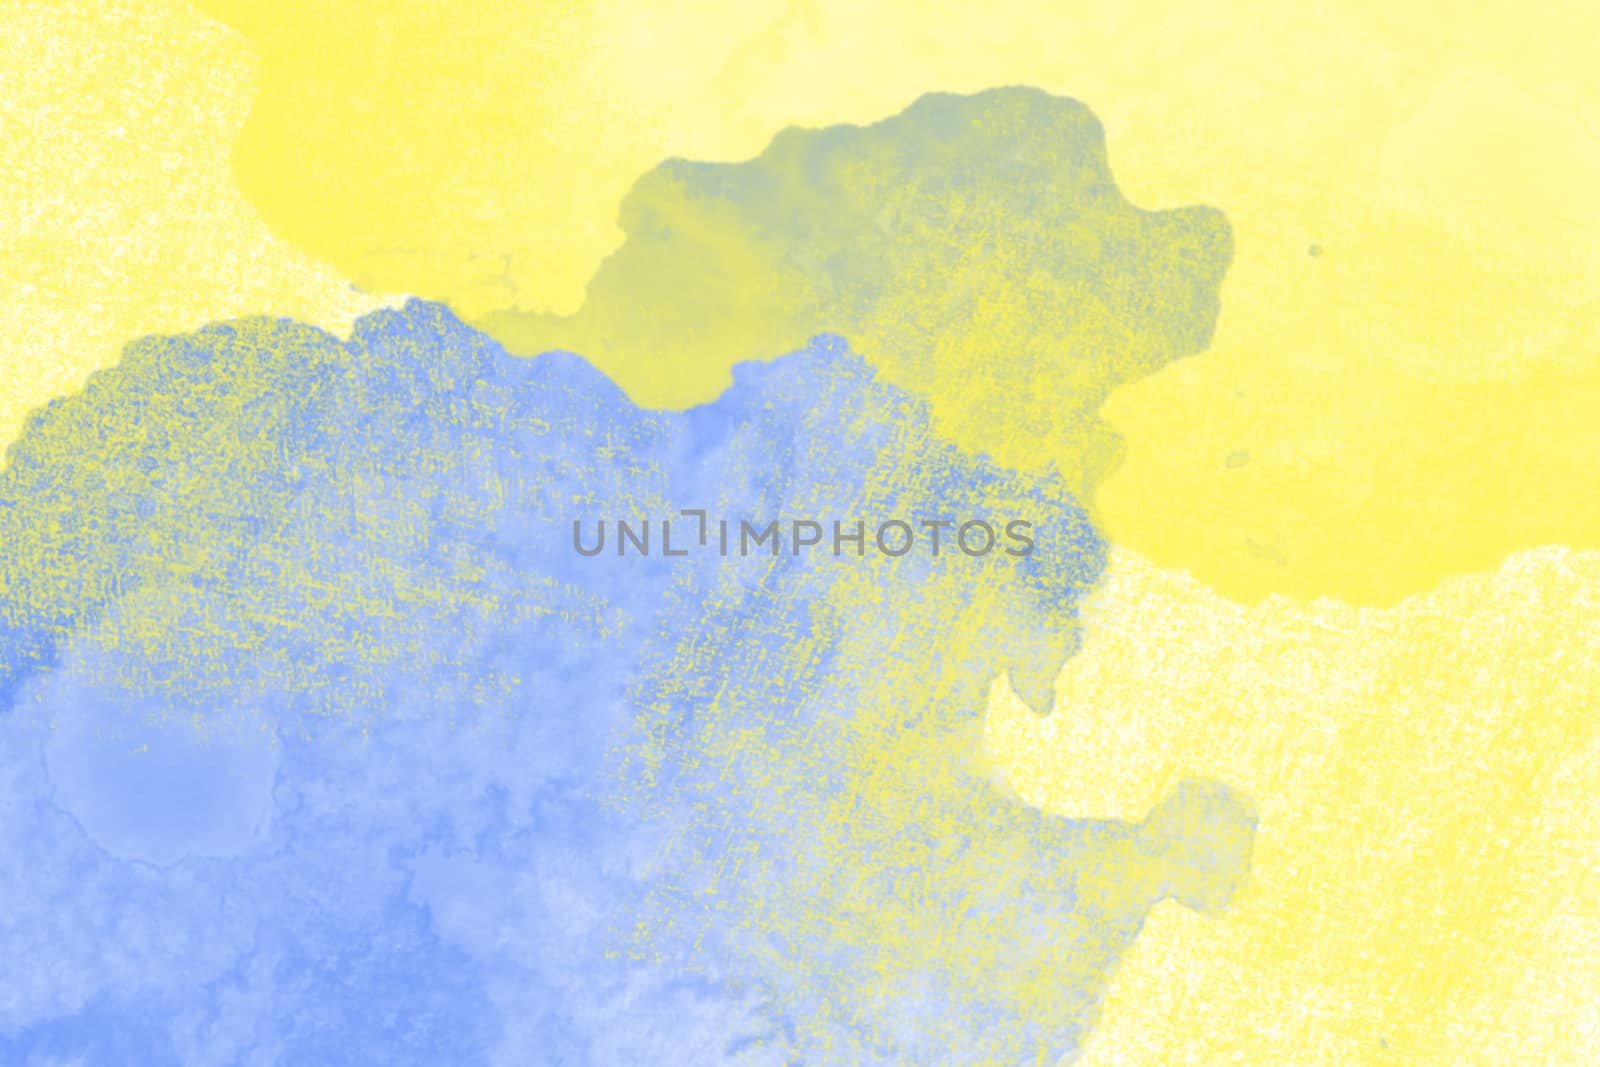 Watercolor texture on paper in yellow and blue for background, abstract watercolor painting